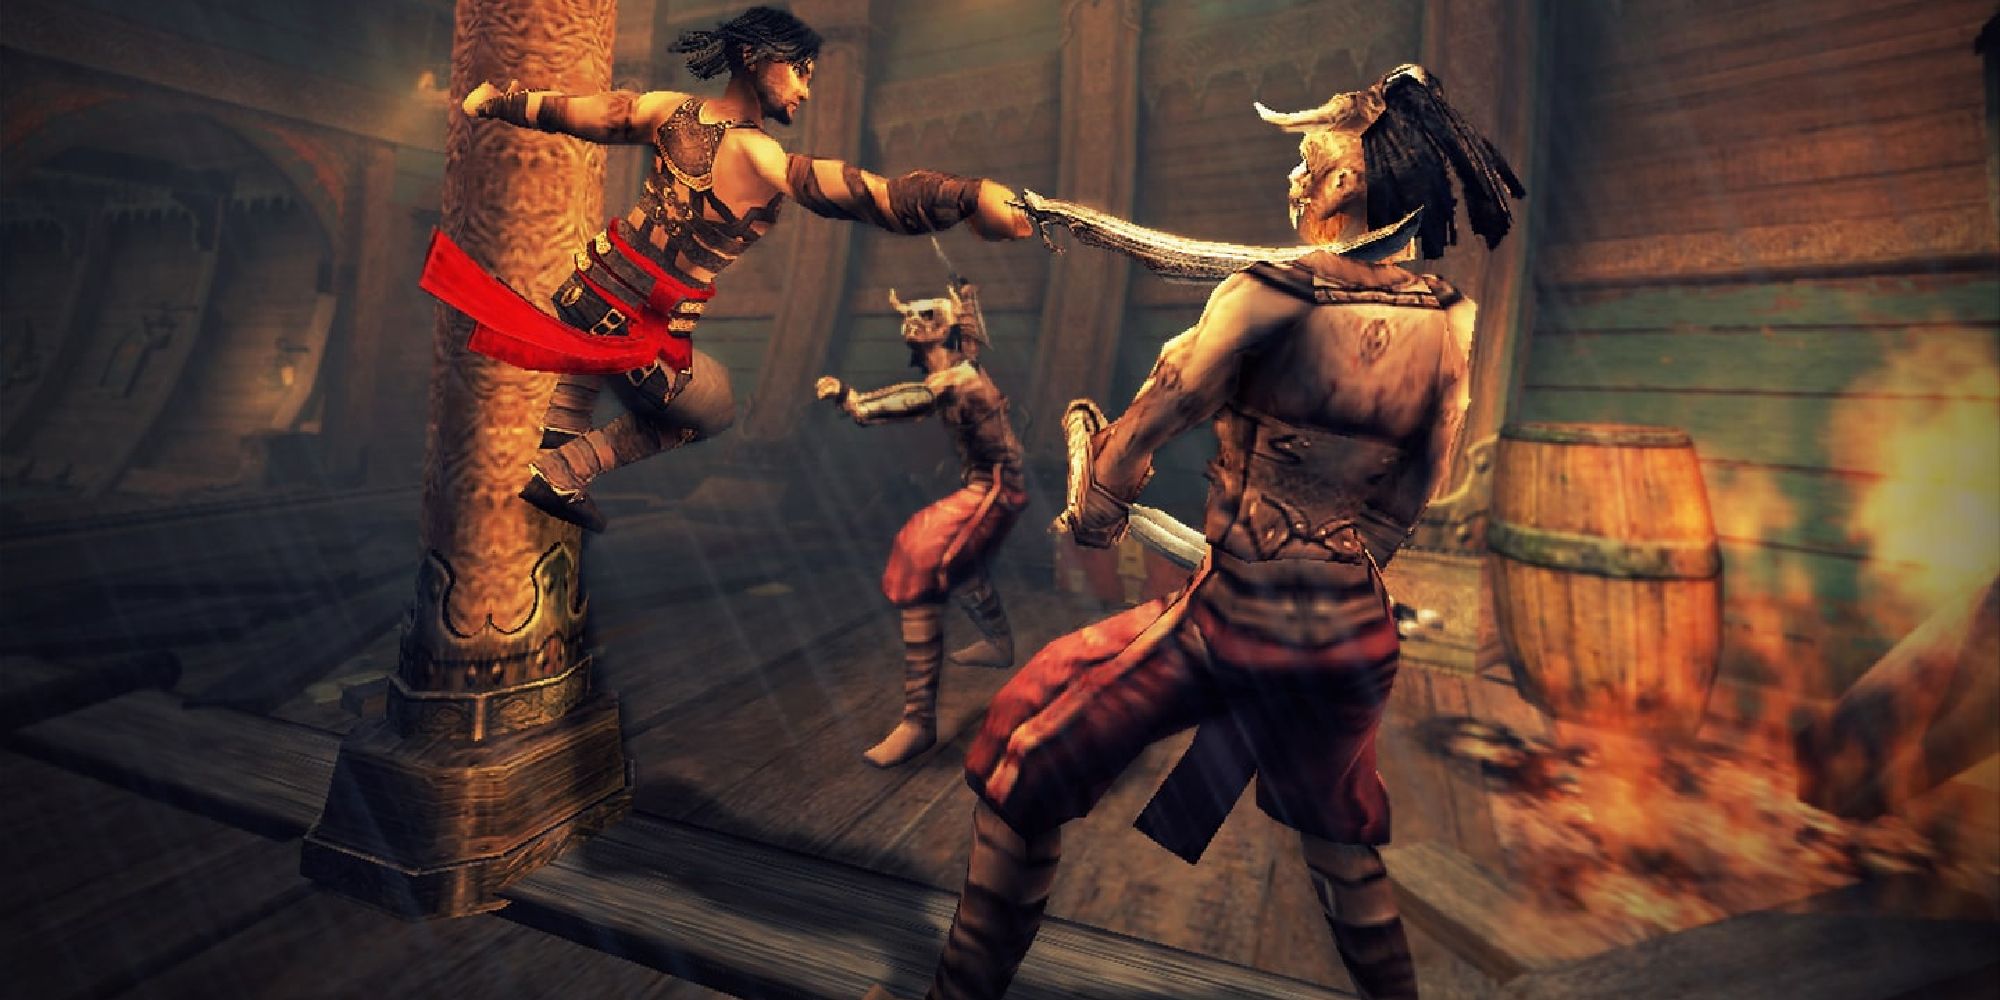 Review: Gameloft Prince of Persia: Warrior Within